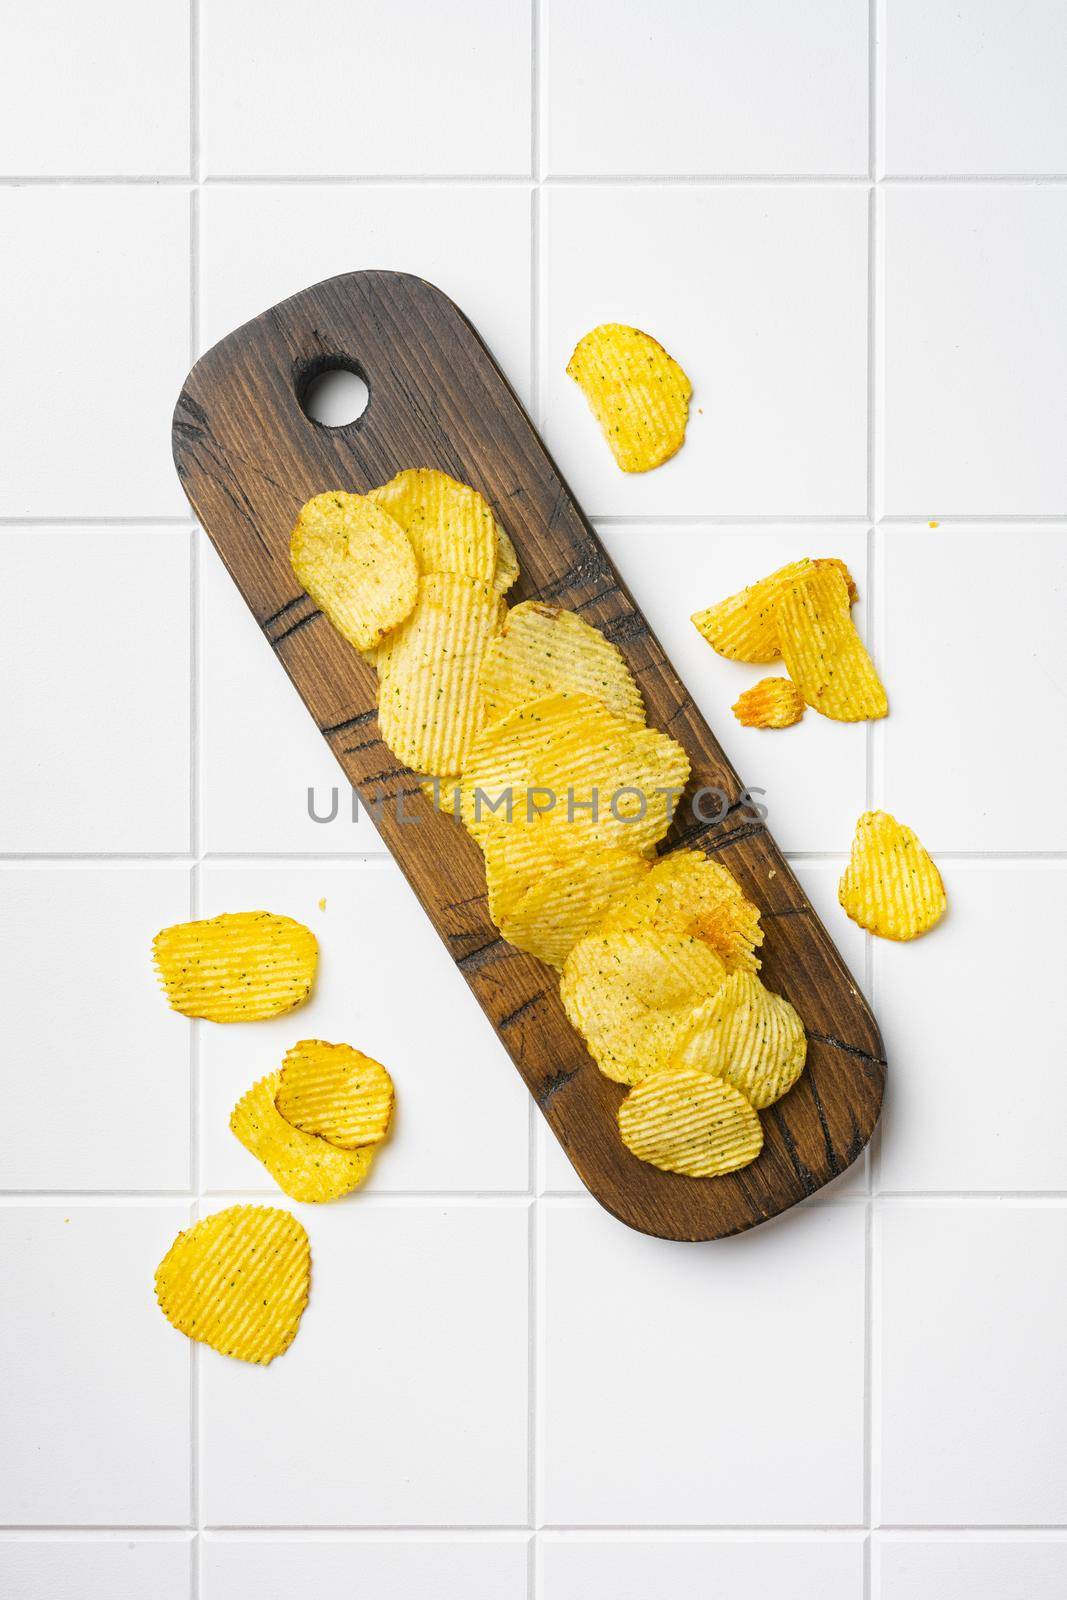 Wavy Potato Chips on white ceramic squared tile table background, top view flat lay by Ilianesolenyi